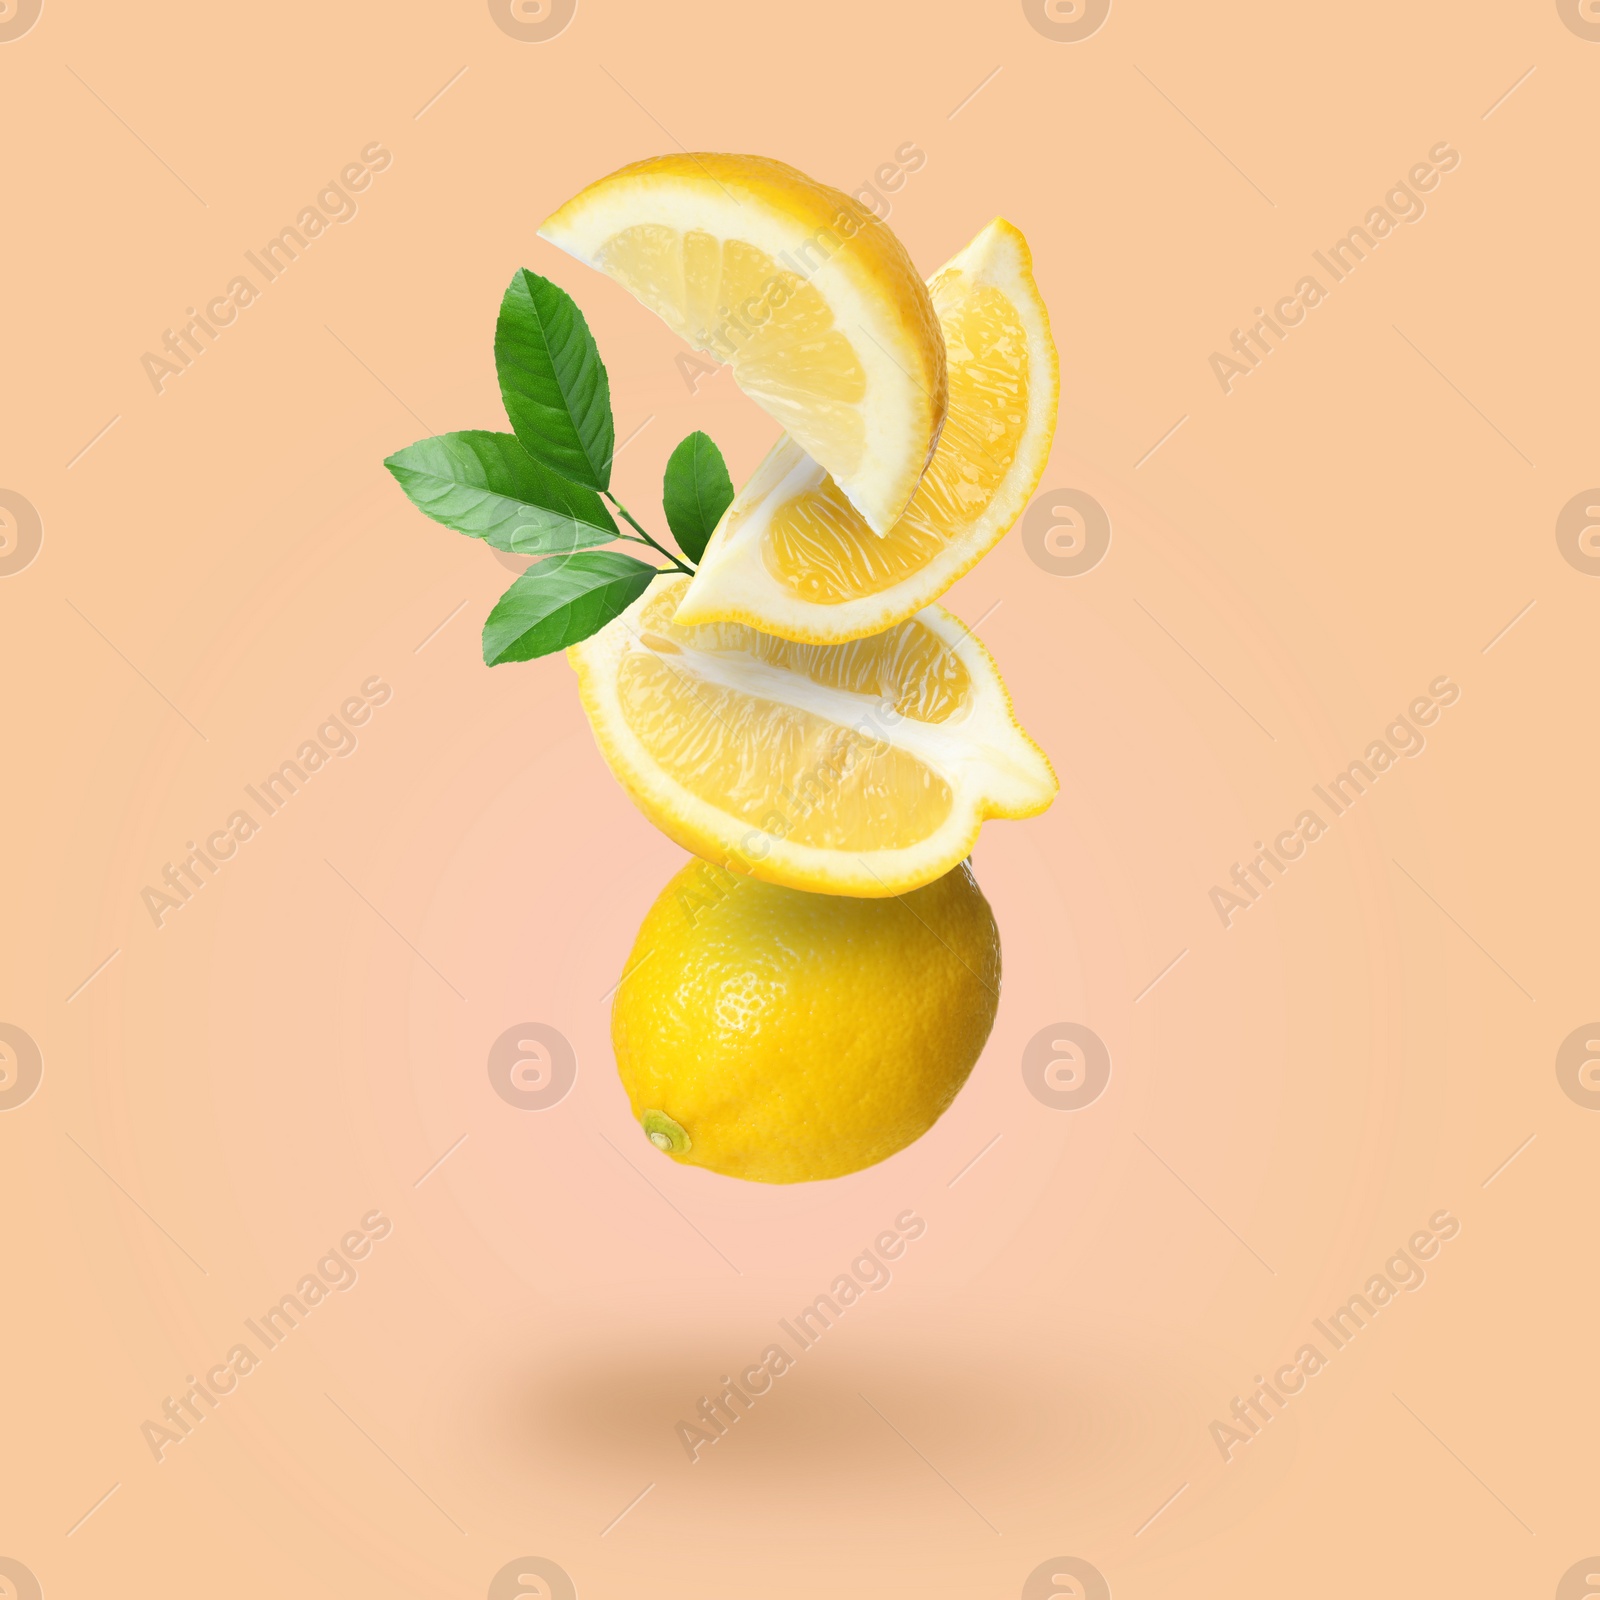 Image of Cut and whole fresh lemons with green leaves falling on pale coral background